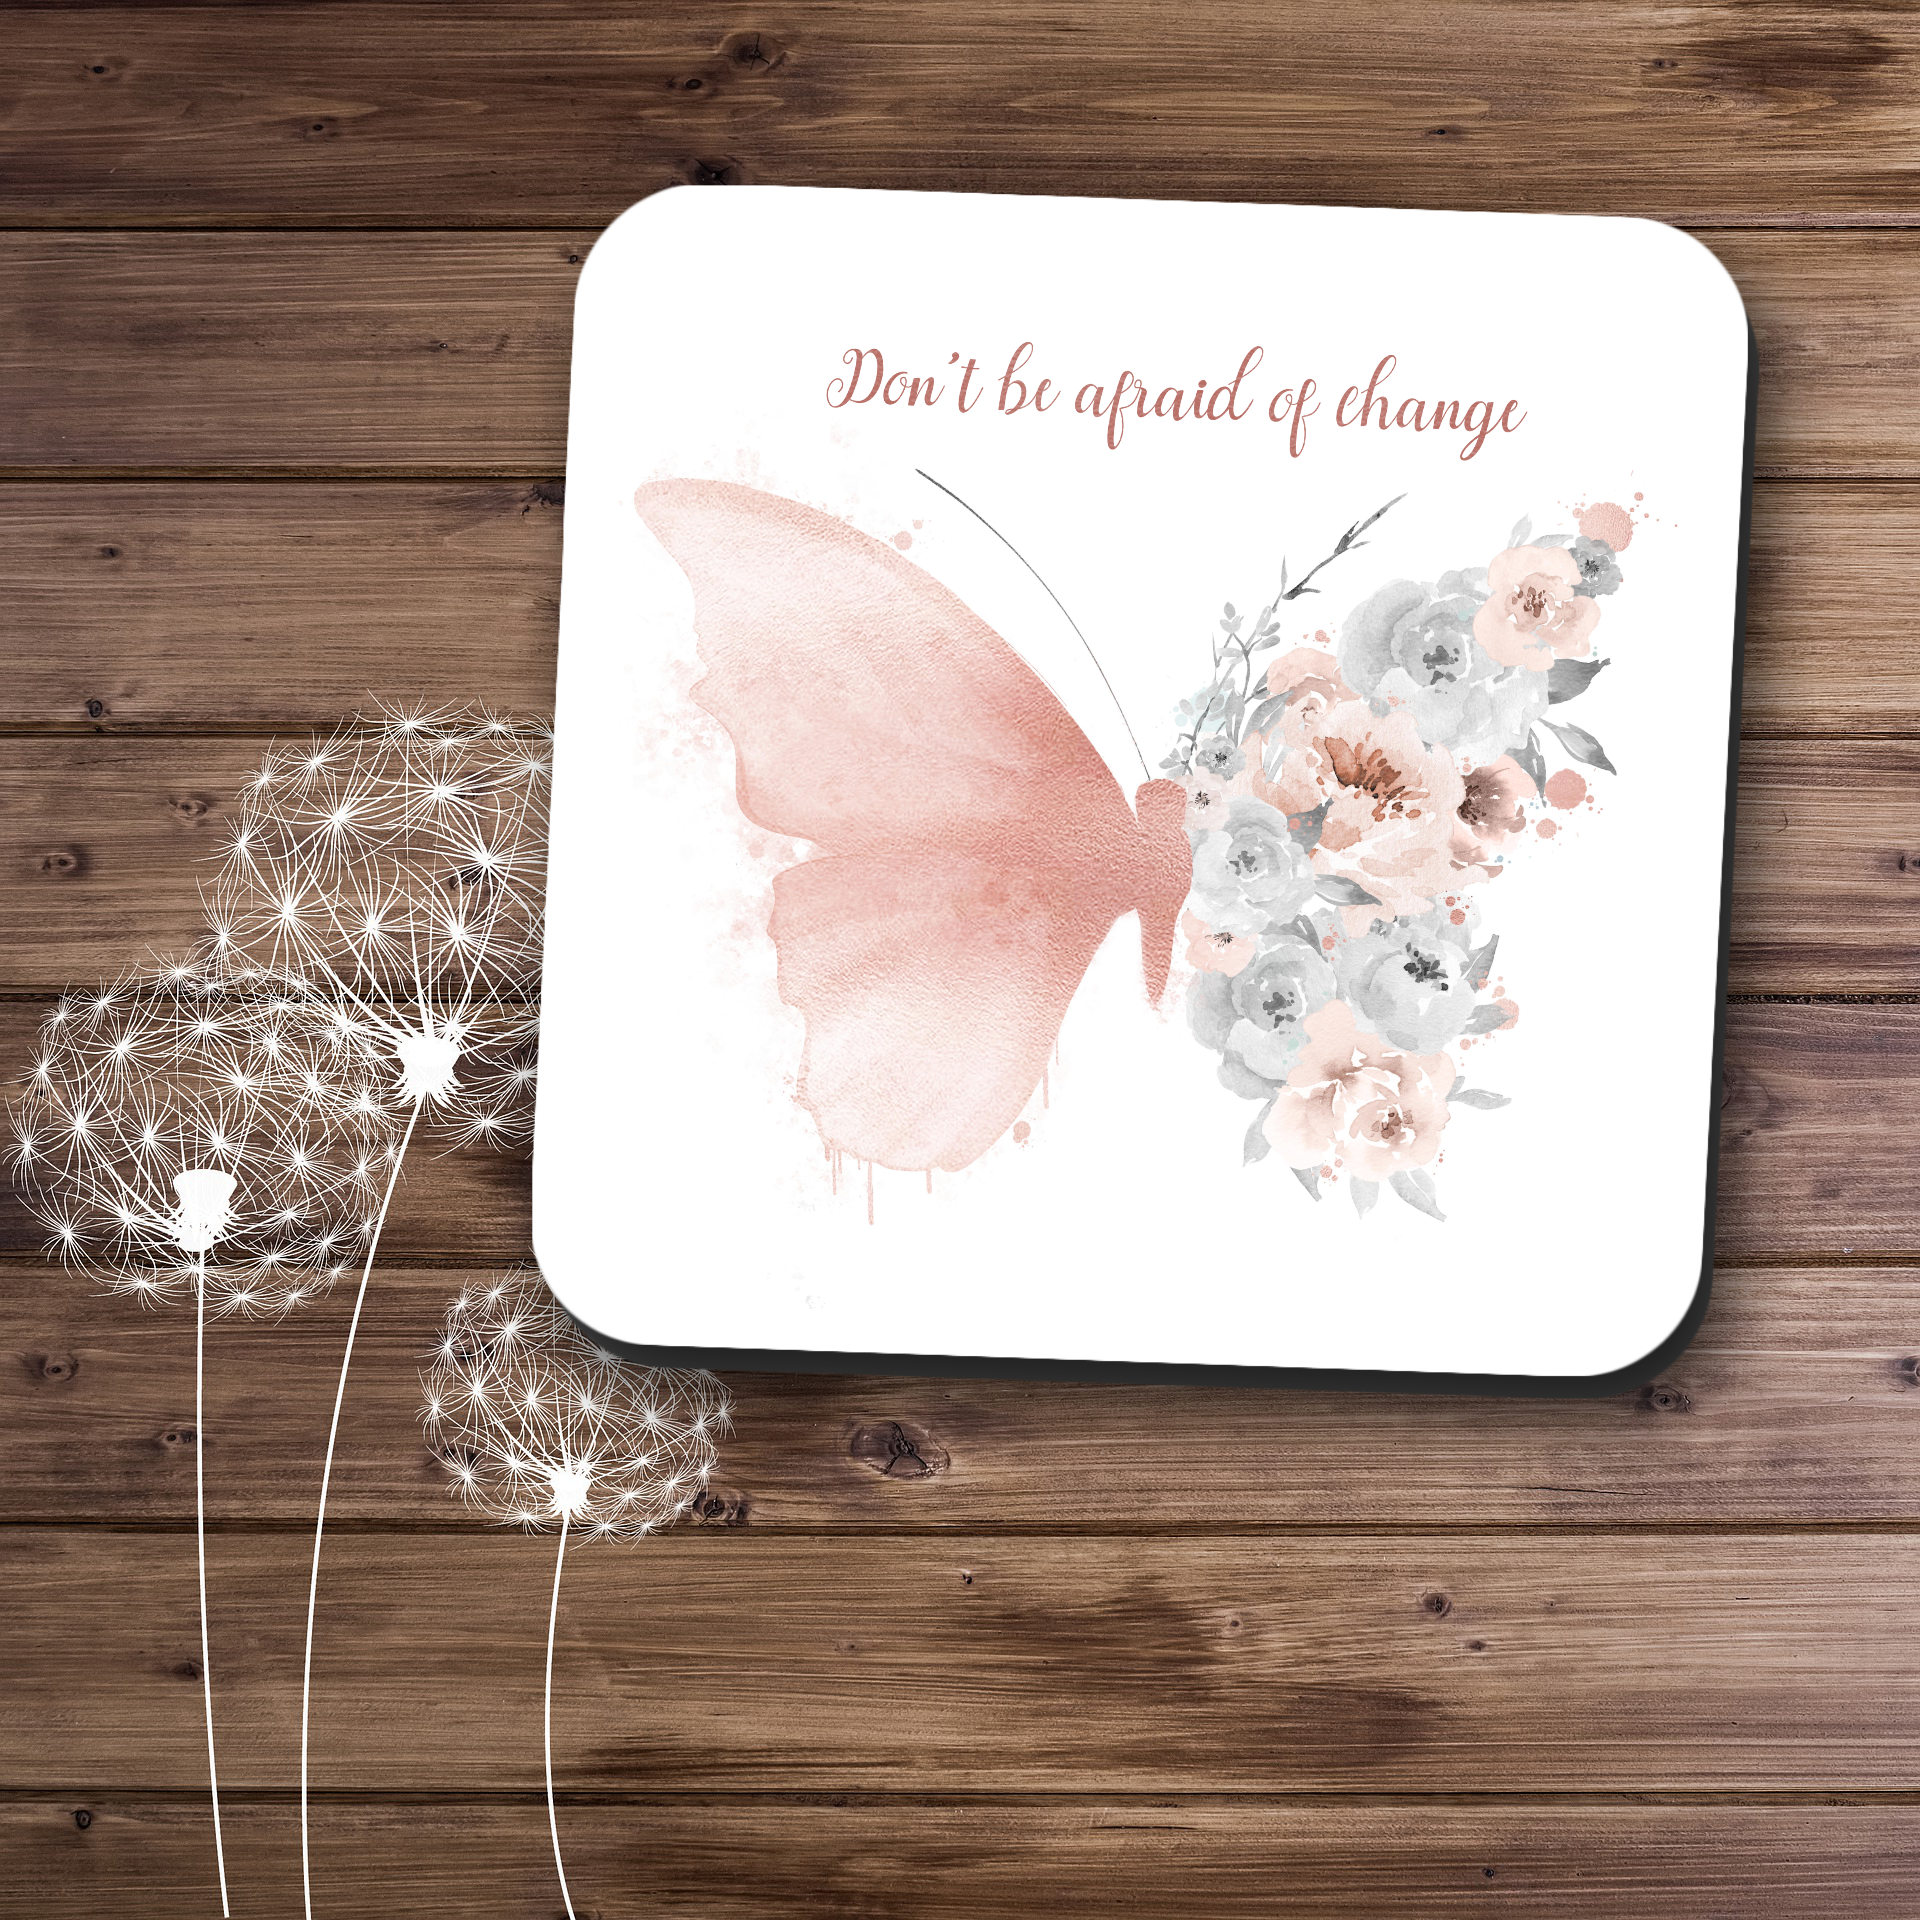 Mug and coaster set featuring a rose gold floral butterfly and the text 'Don't be afraid of change'